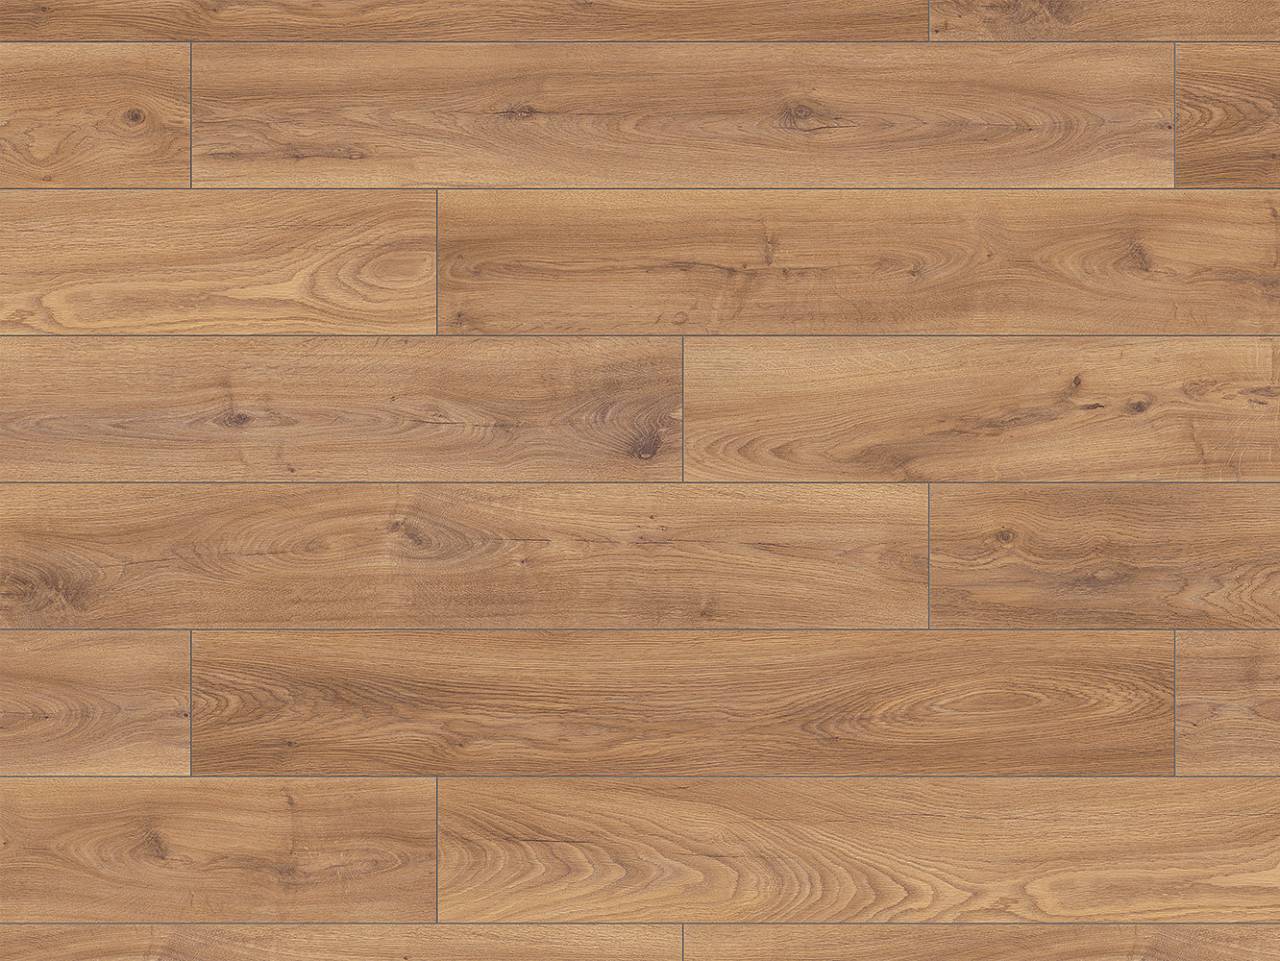 Close-up of K450 Firebrand Oak: Showcasing its distinctive grain and captivating fiery tones, adding warmth and character.